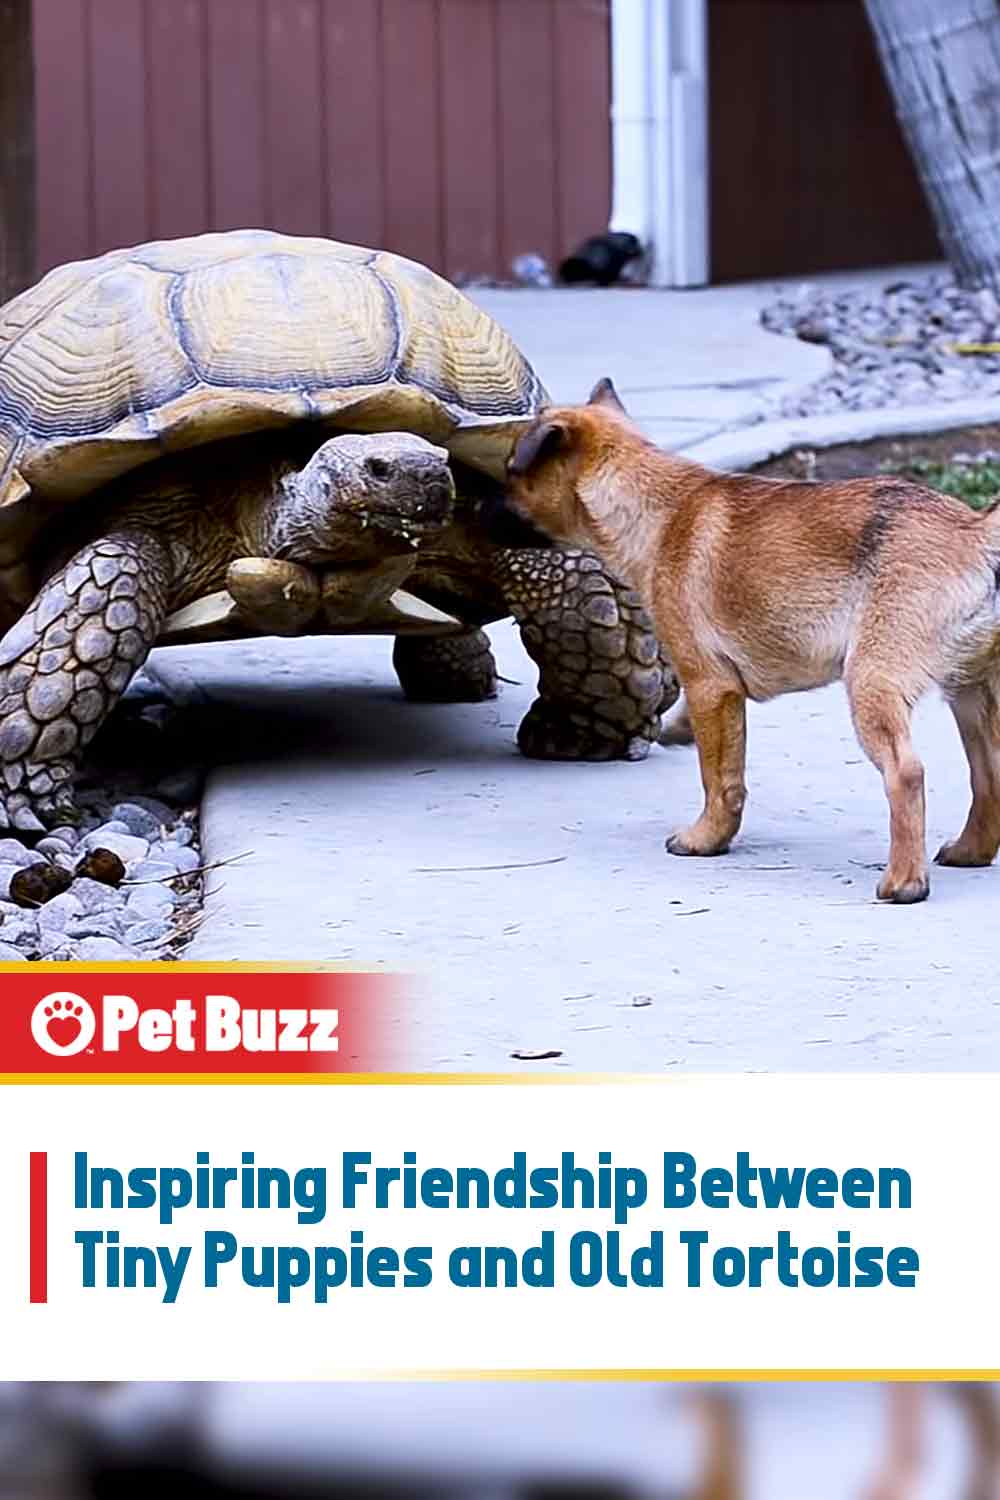 Inspiring Friendship Between Tiny Puppies and Old Tortoise